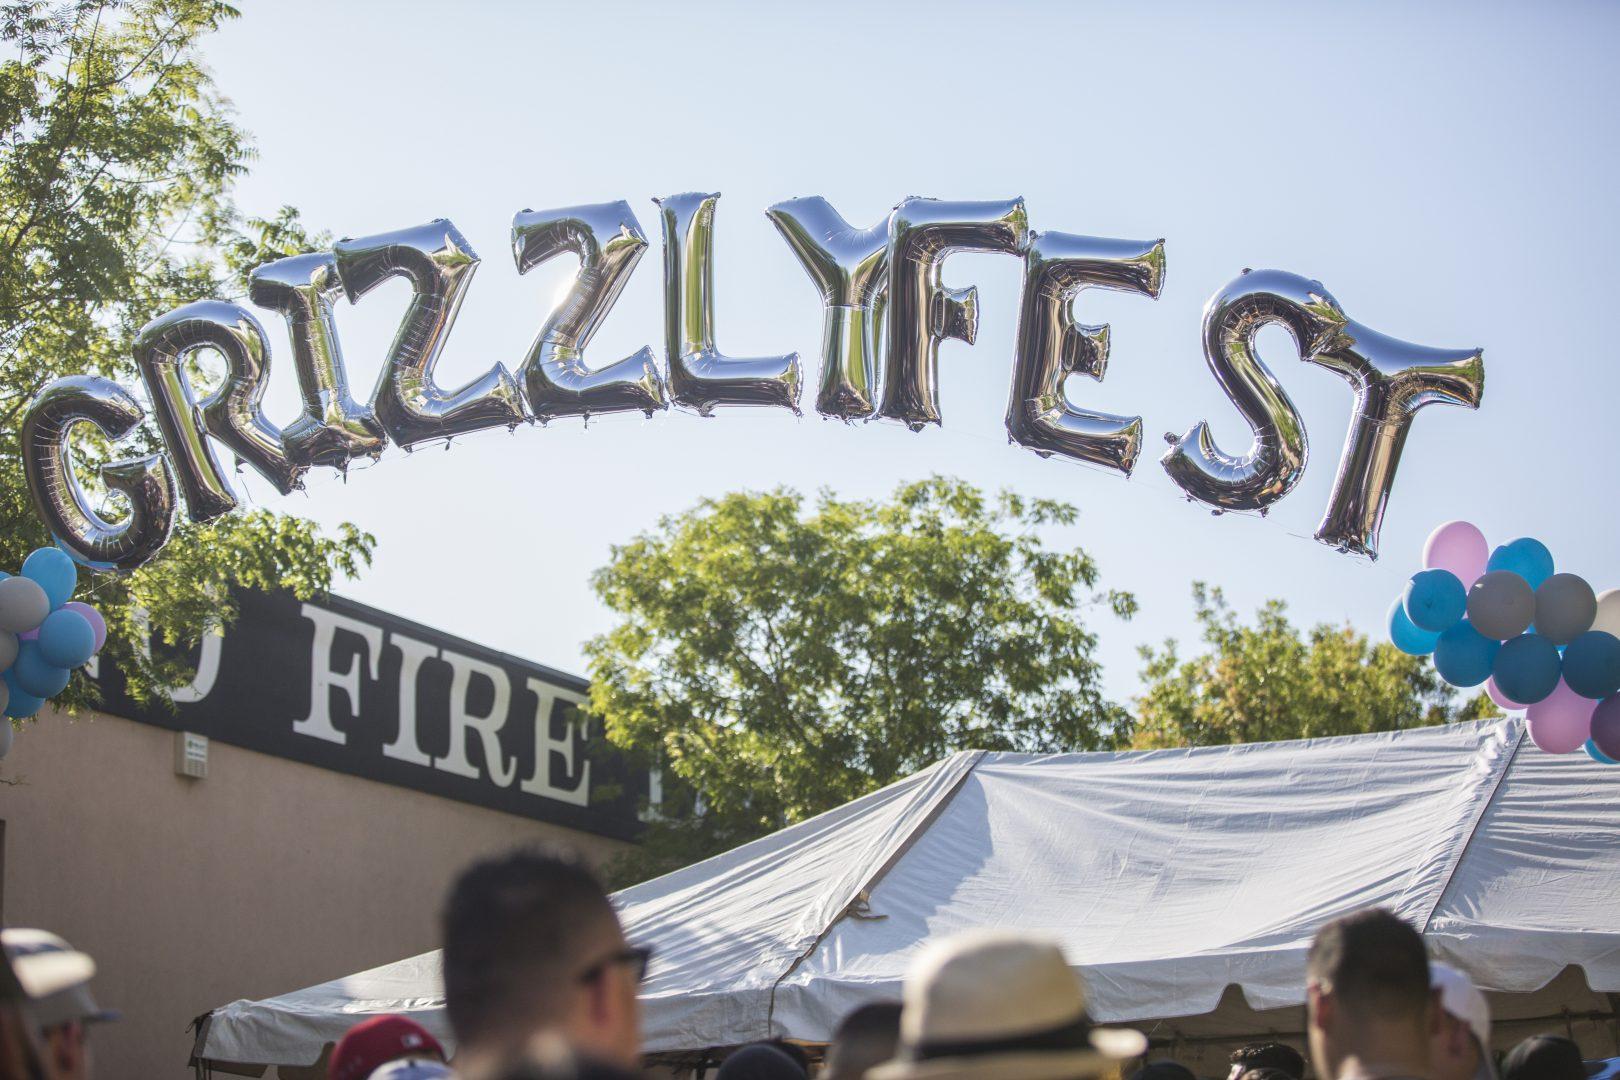  The entrance to Grizzly Fest 2017 at Chuckchansi Park on April 29, 2017.  (Khone Saysamongdy/ The Collegian)